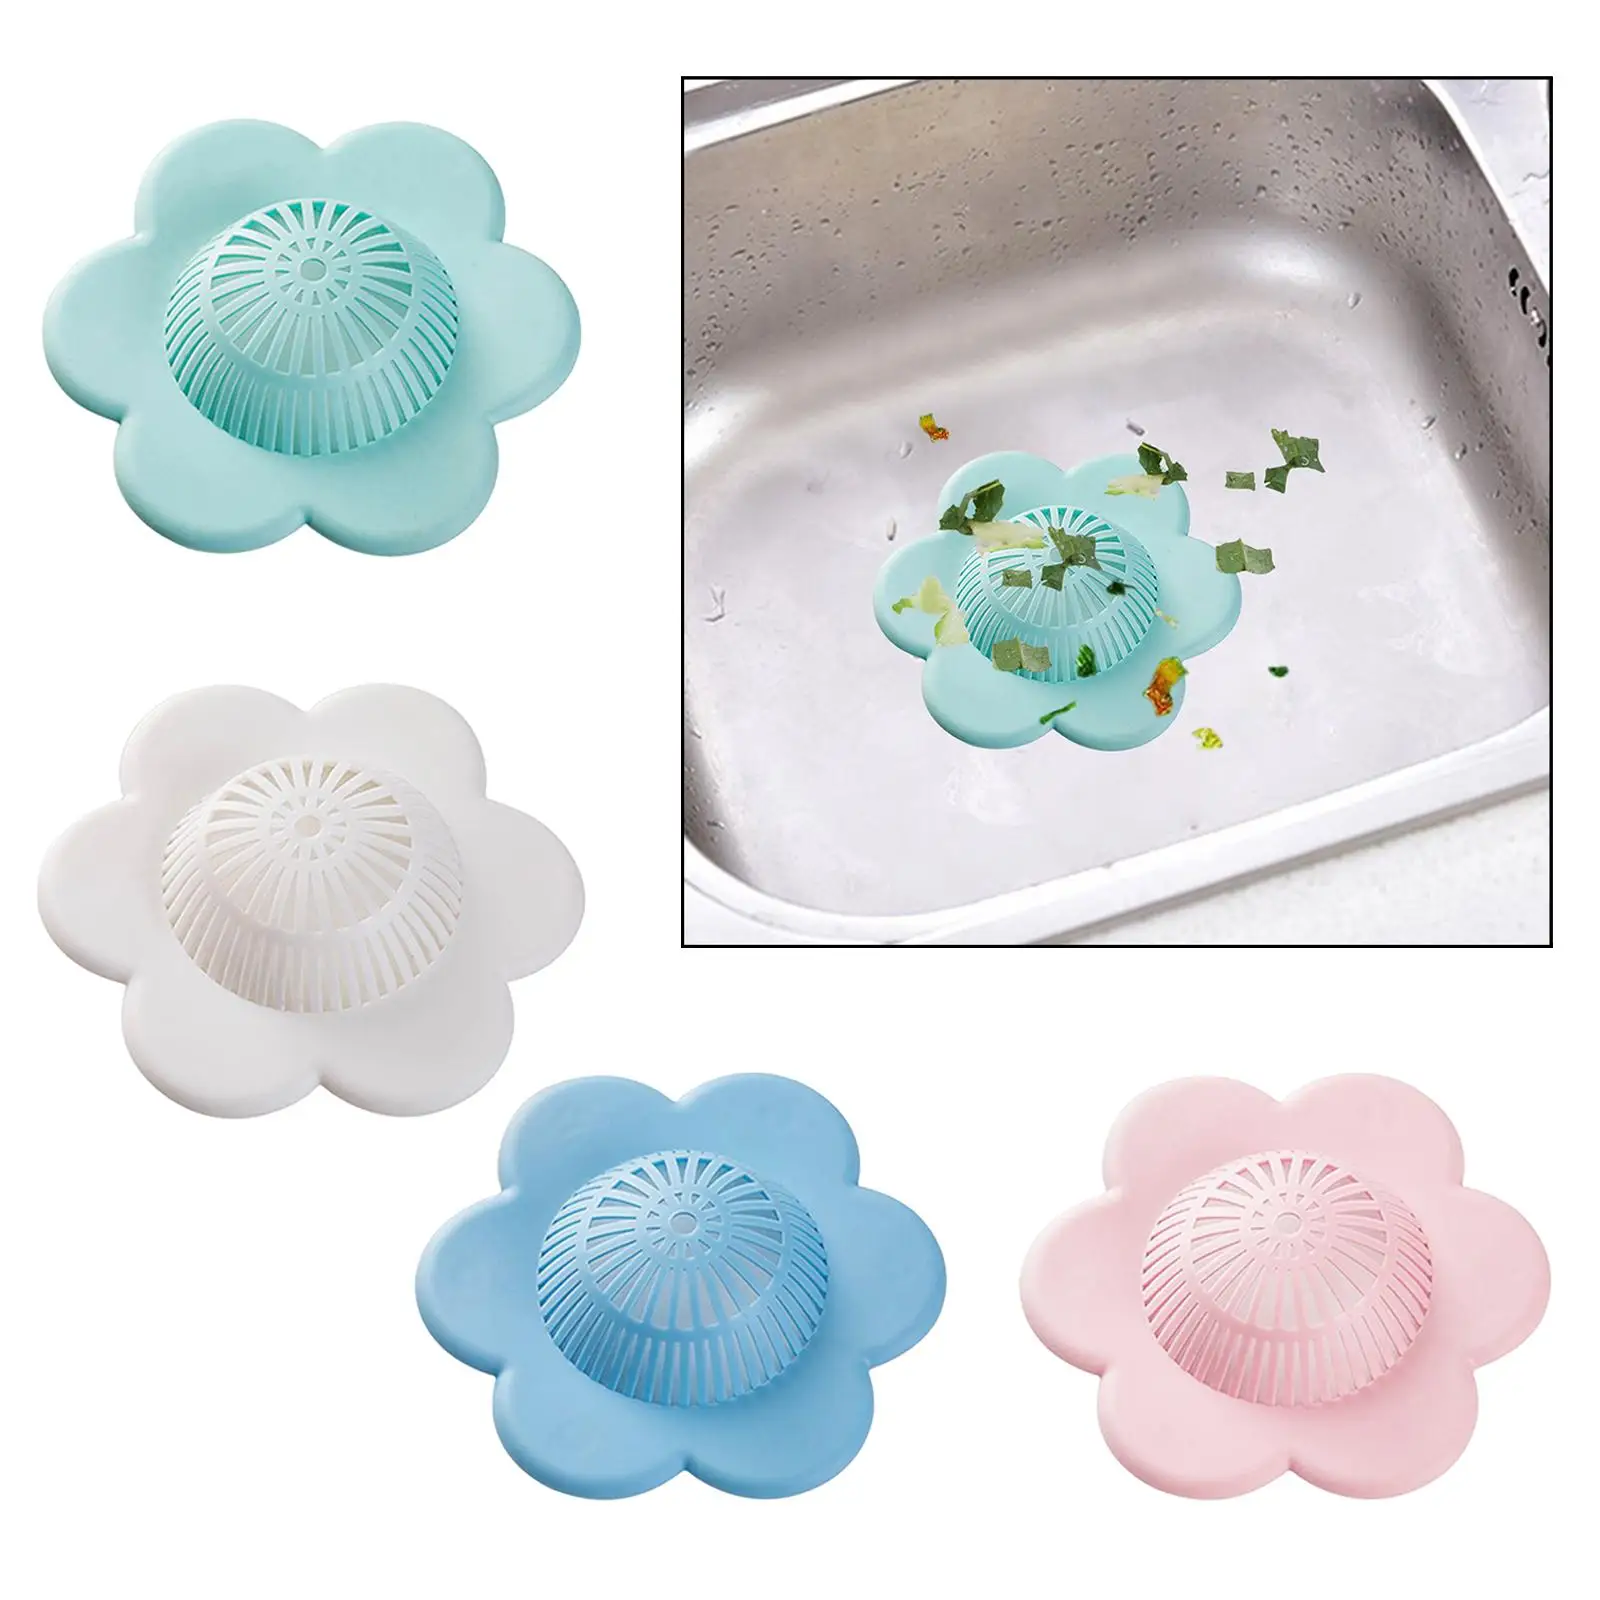 hair stoppers Drainage Shower Drain Protectors with Suction Cup Sink Strainer for Bathtub